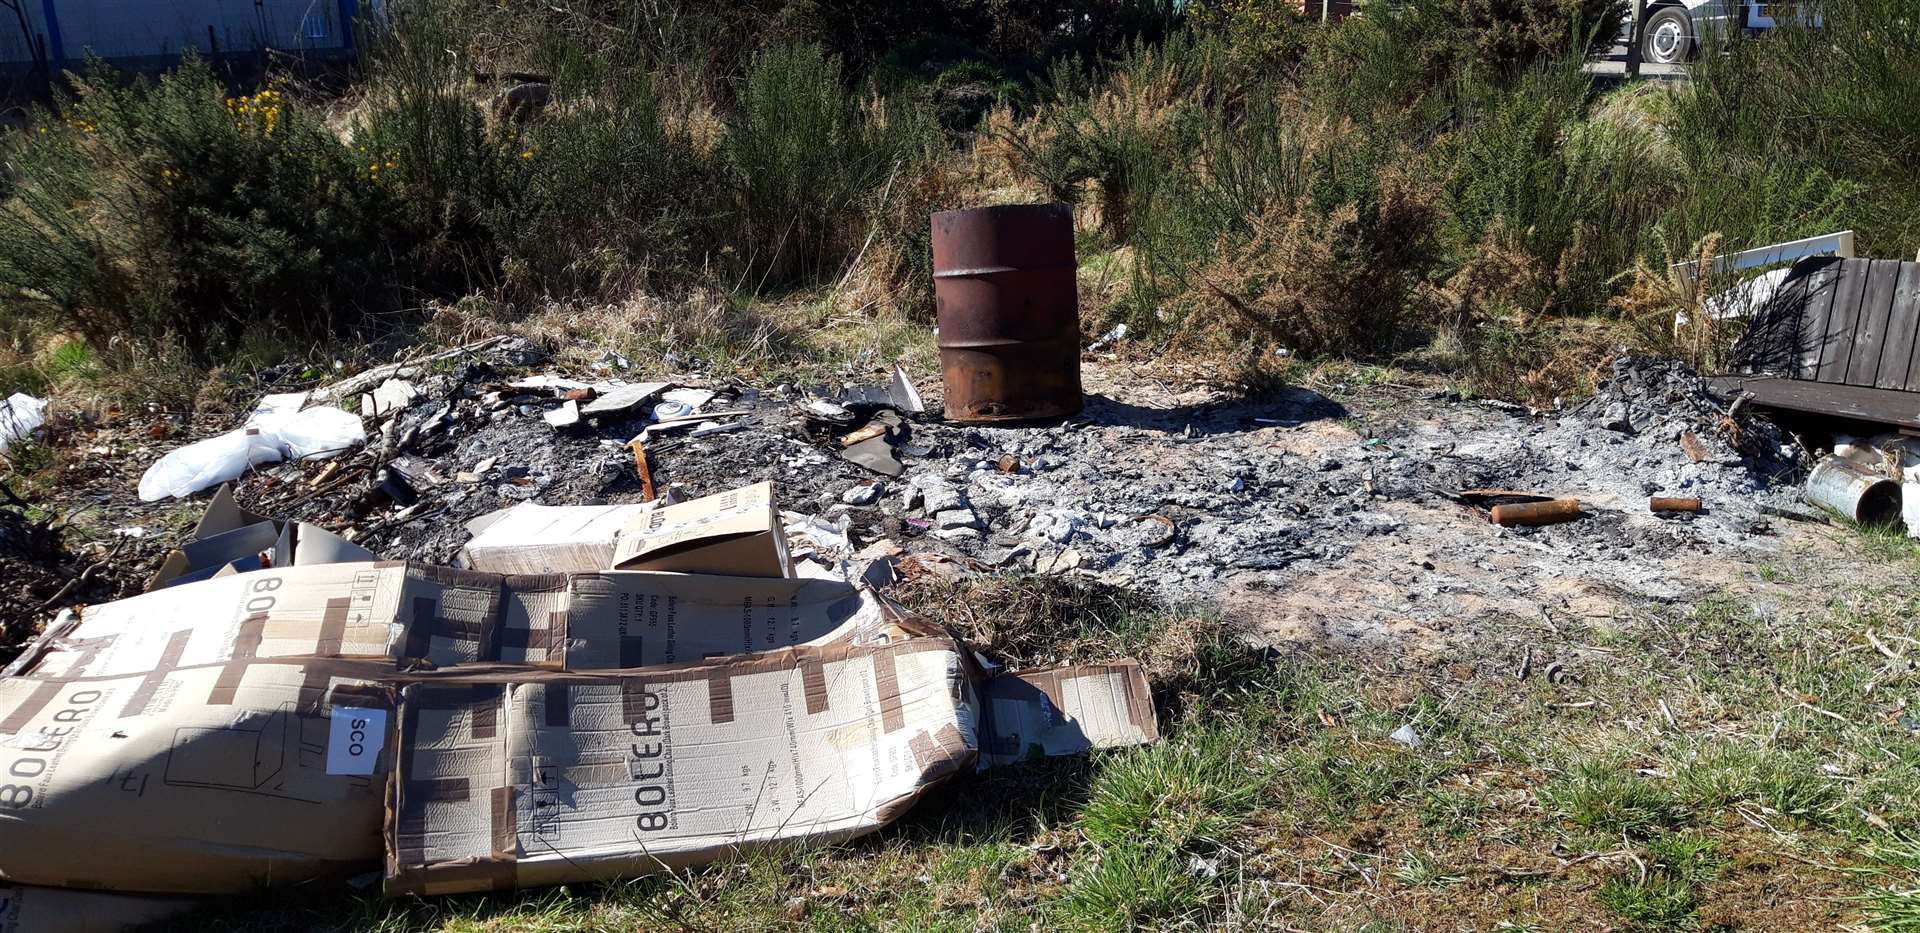 Fly-tippers are turning the overgrown site at Dornoch Retail Park into an eyesore.